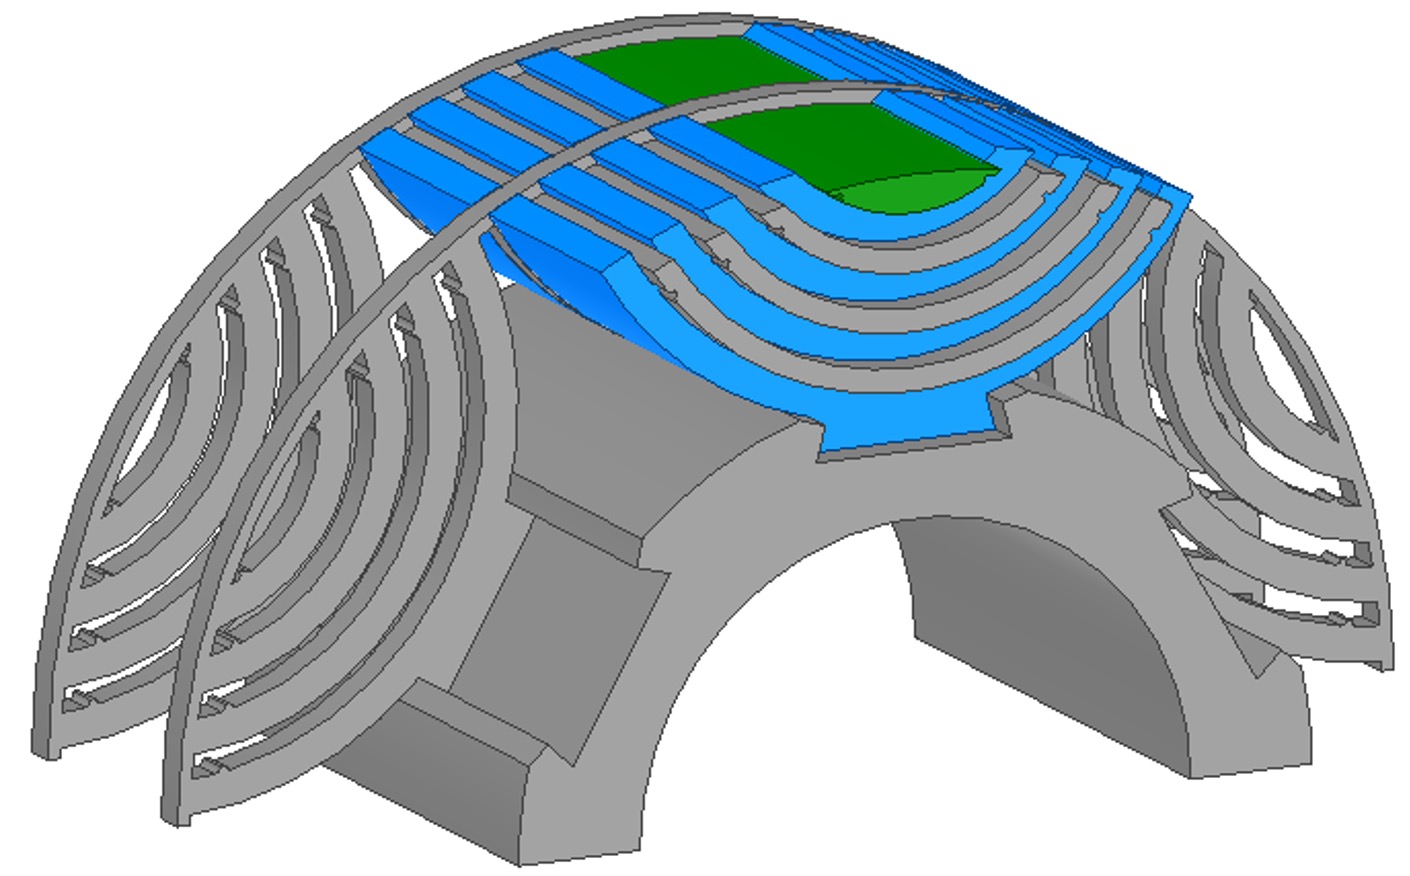 Rotor structural design. Blue pieces are rotor laminations. Grey and green parts are non-magnetic light strong supporting materials. 